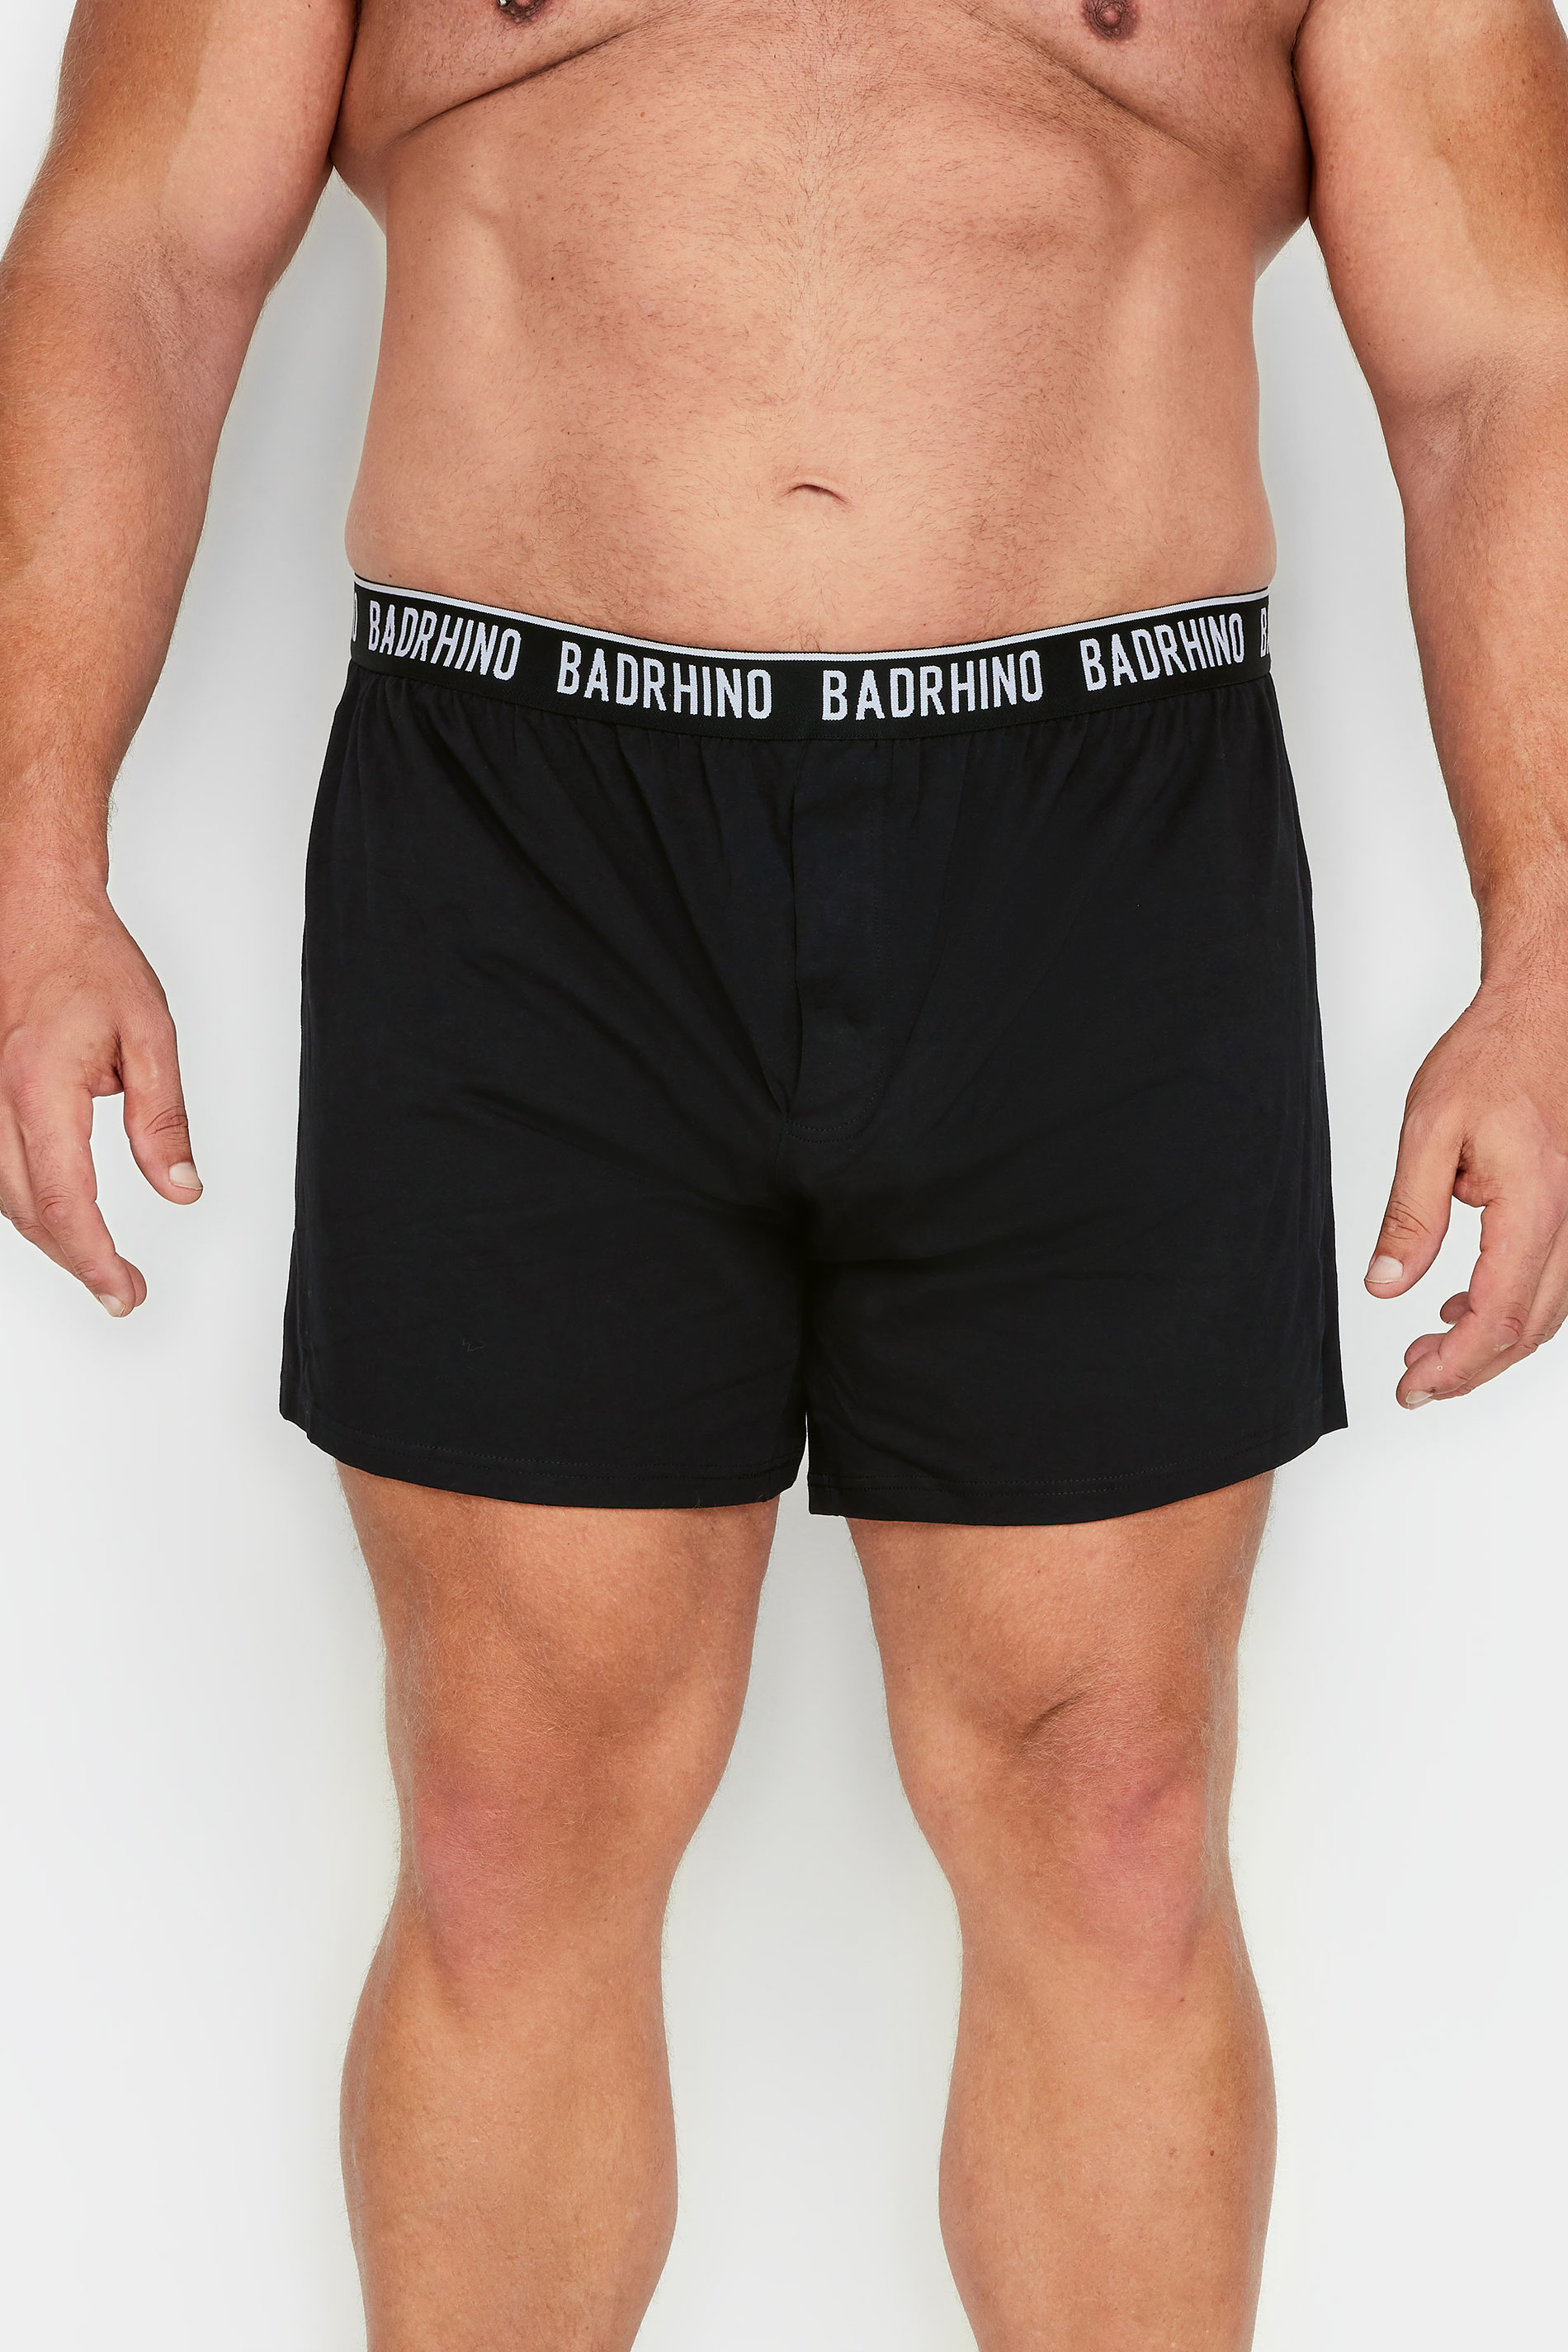 BadRhino Big & Tall 5 PACK Black Button Up Loose Fit Boxers | BadRhino 2